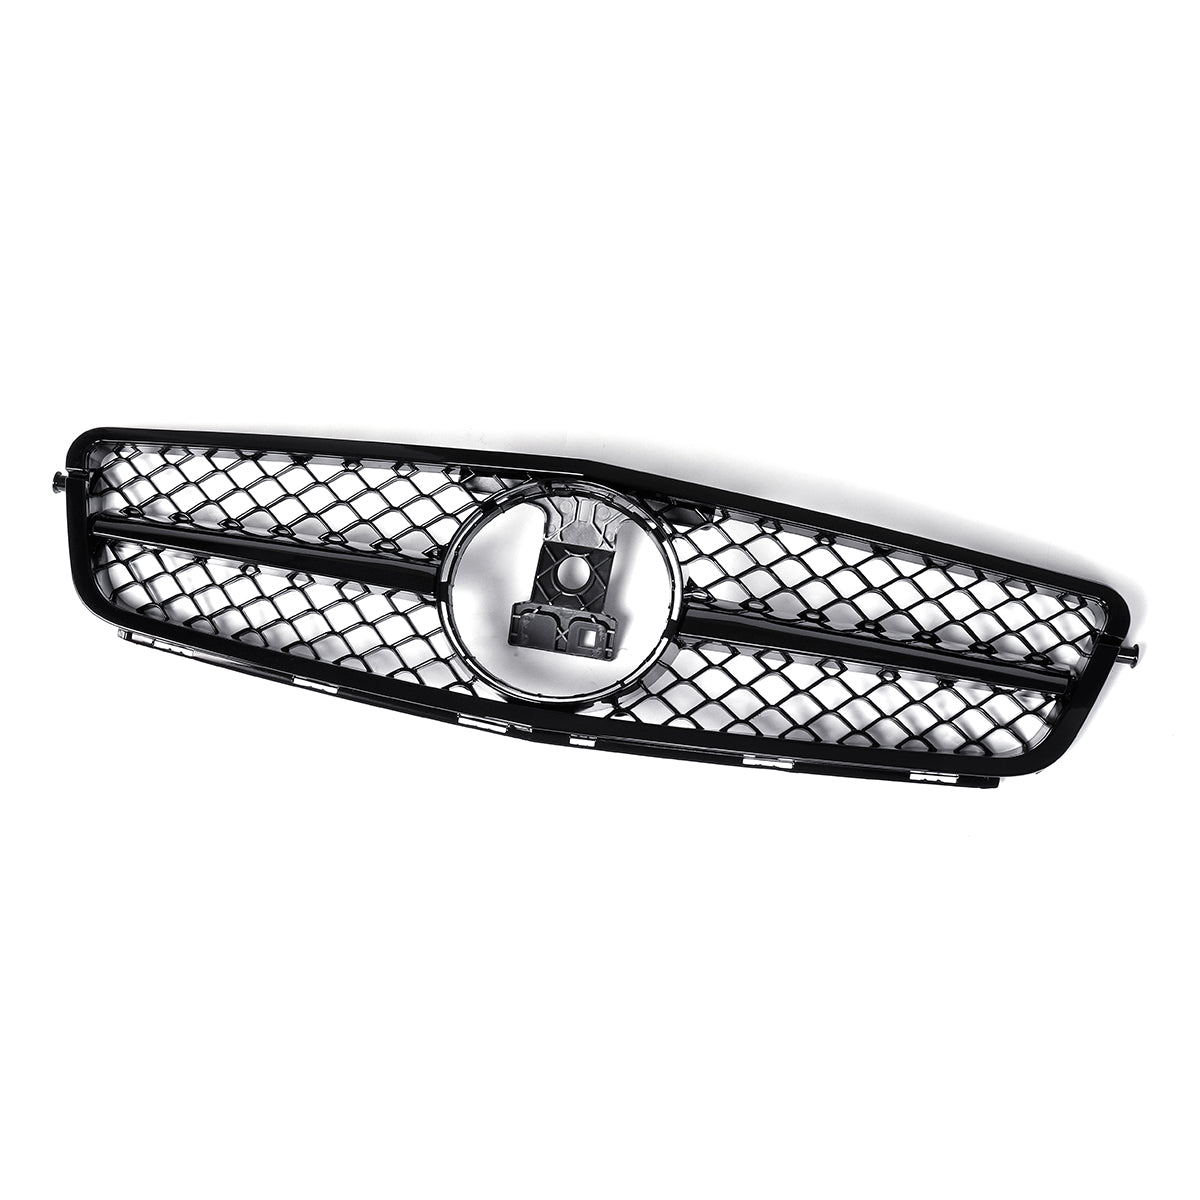 White Smoke Car C63 AMG Style Front Upper Grille Grill For Mercedes C Class W204 C180 C200 C300 C350 2008-2014